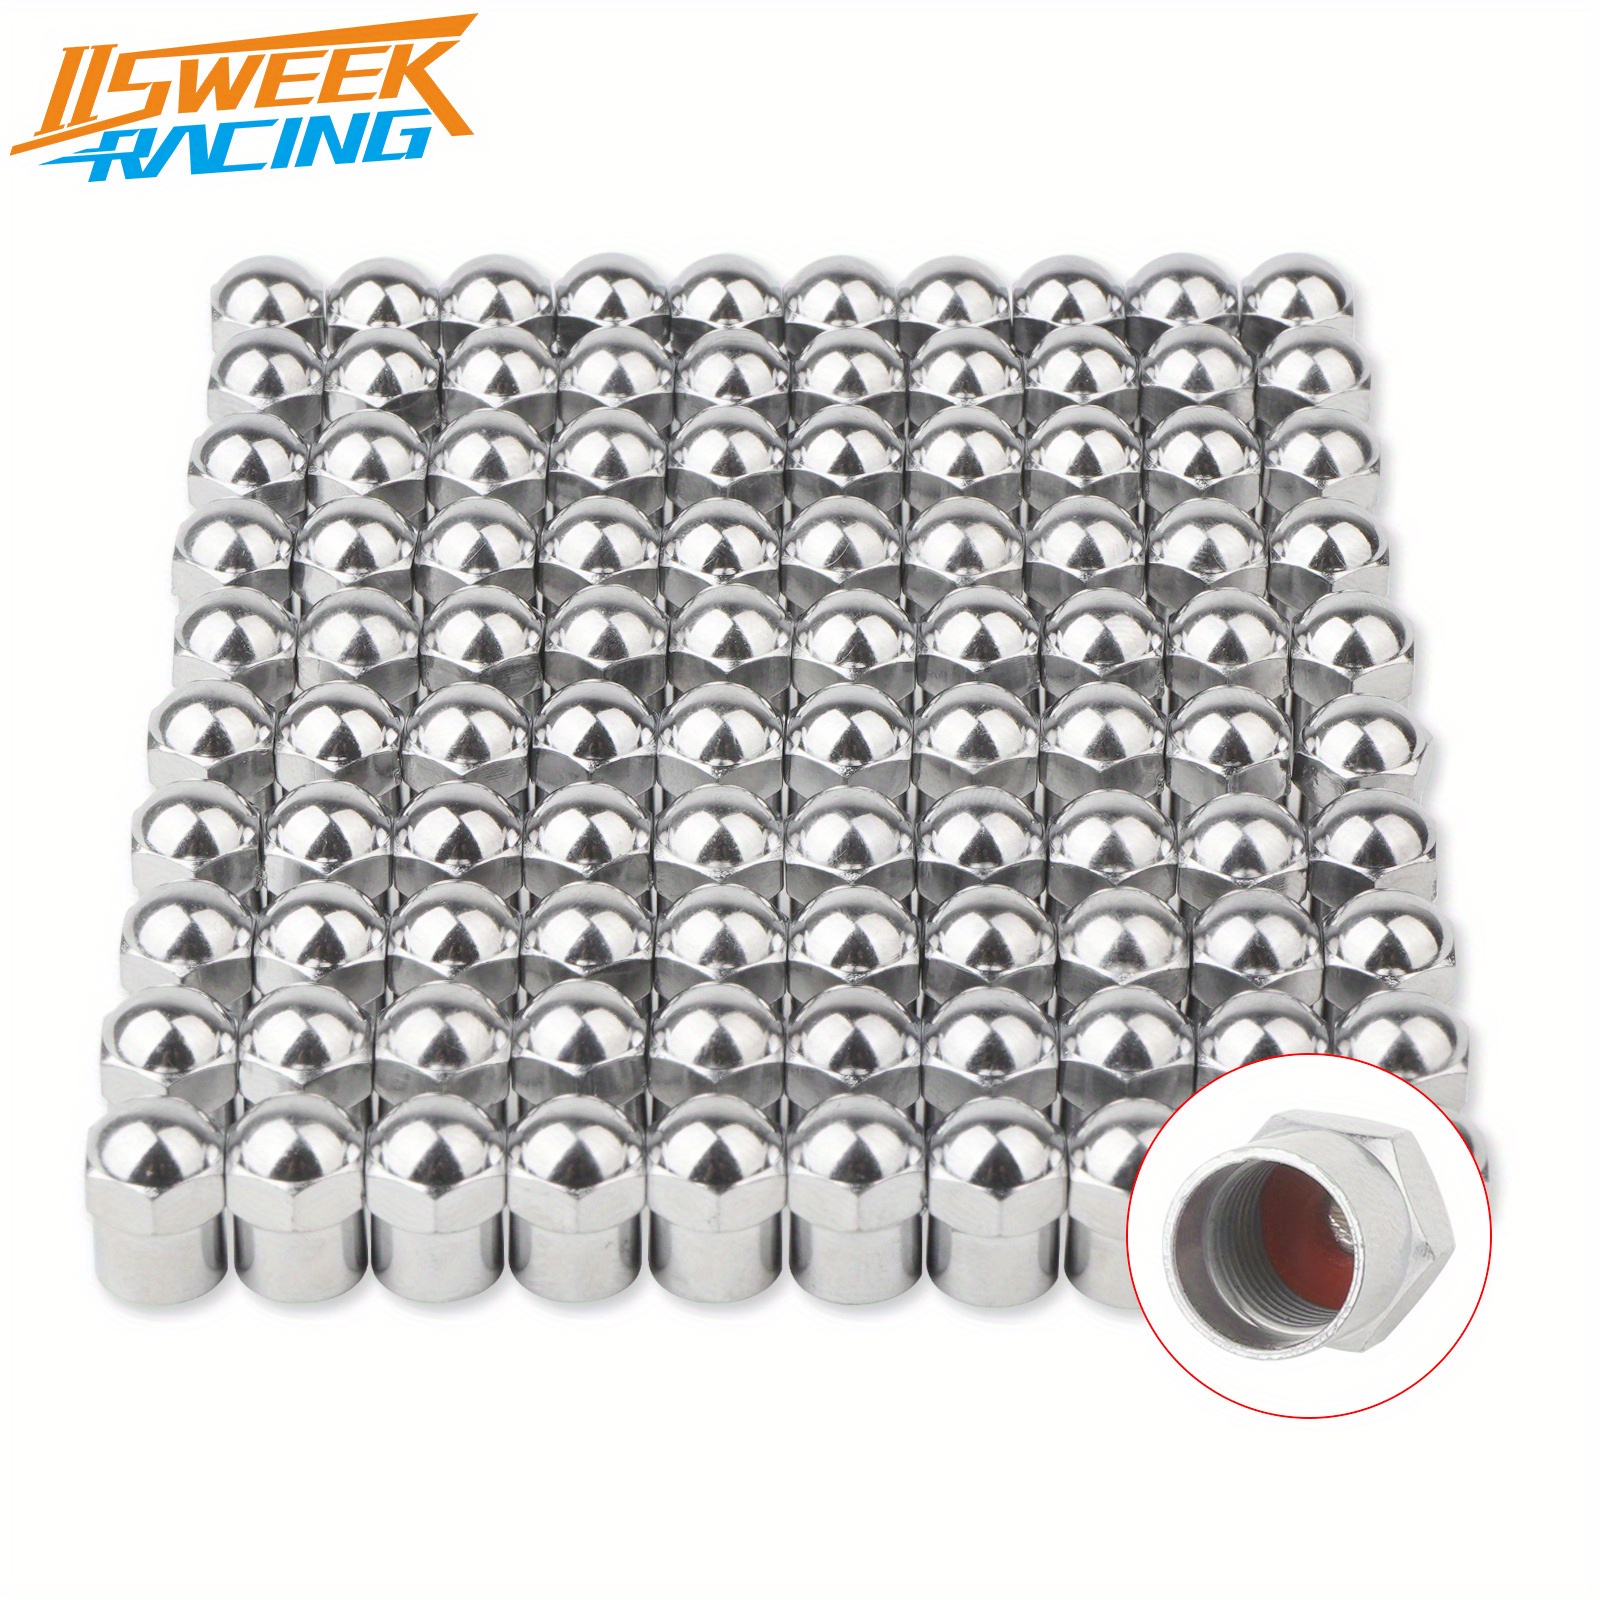 

50/100pcs Tire Stem Valve Caps With O Rubber Ring, Universal Stem Covers For Cars, Suvs, Bike And Bicycle, Trucks, Motorcycles